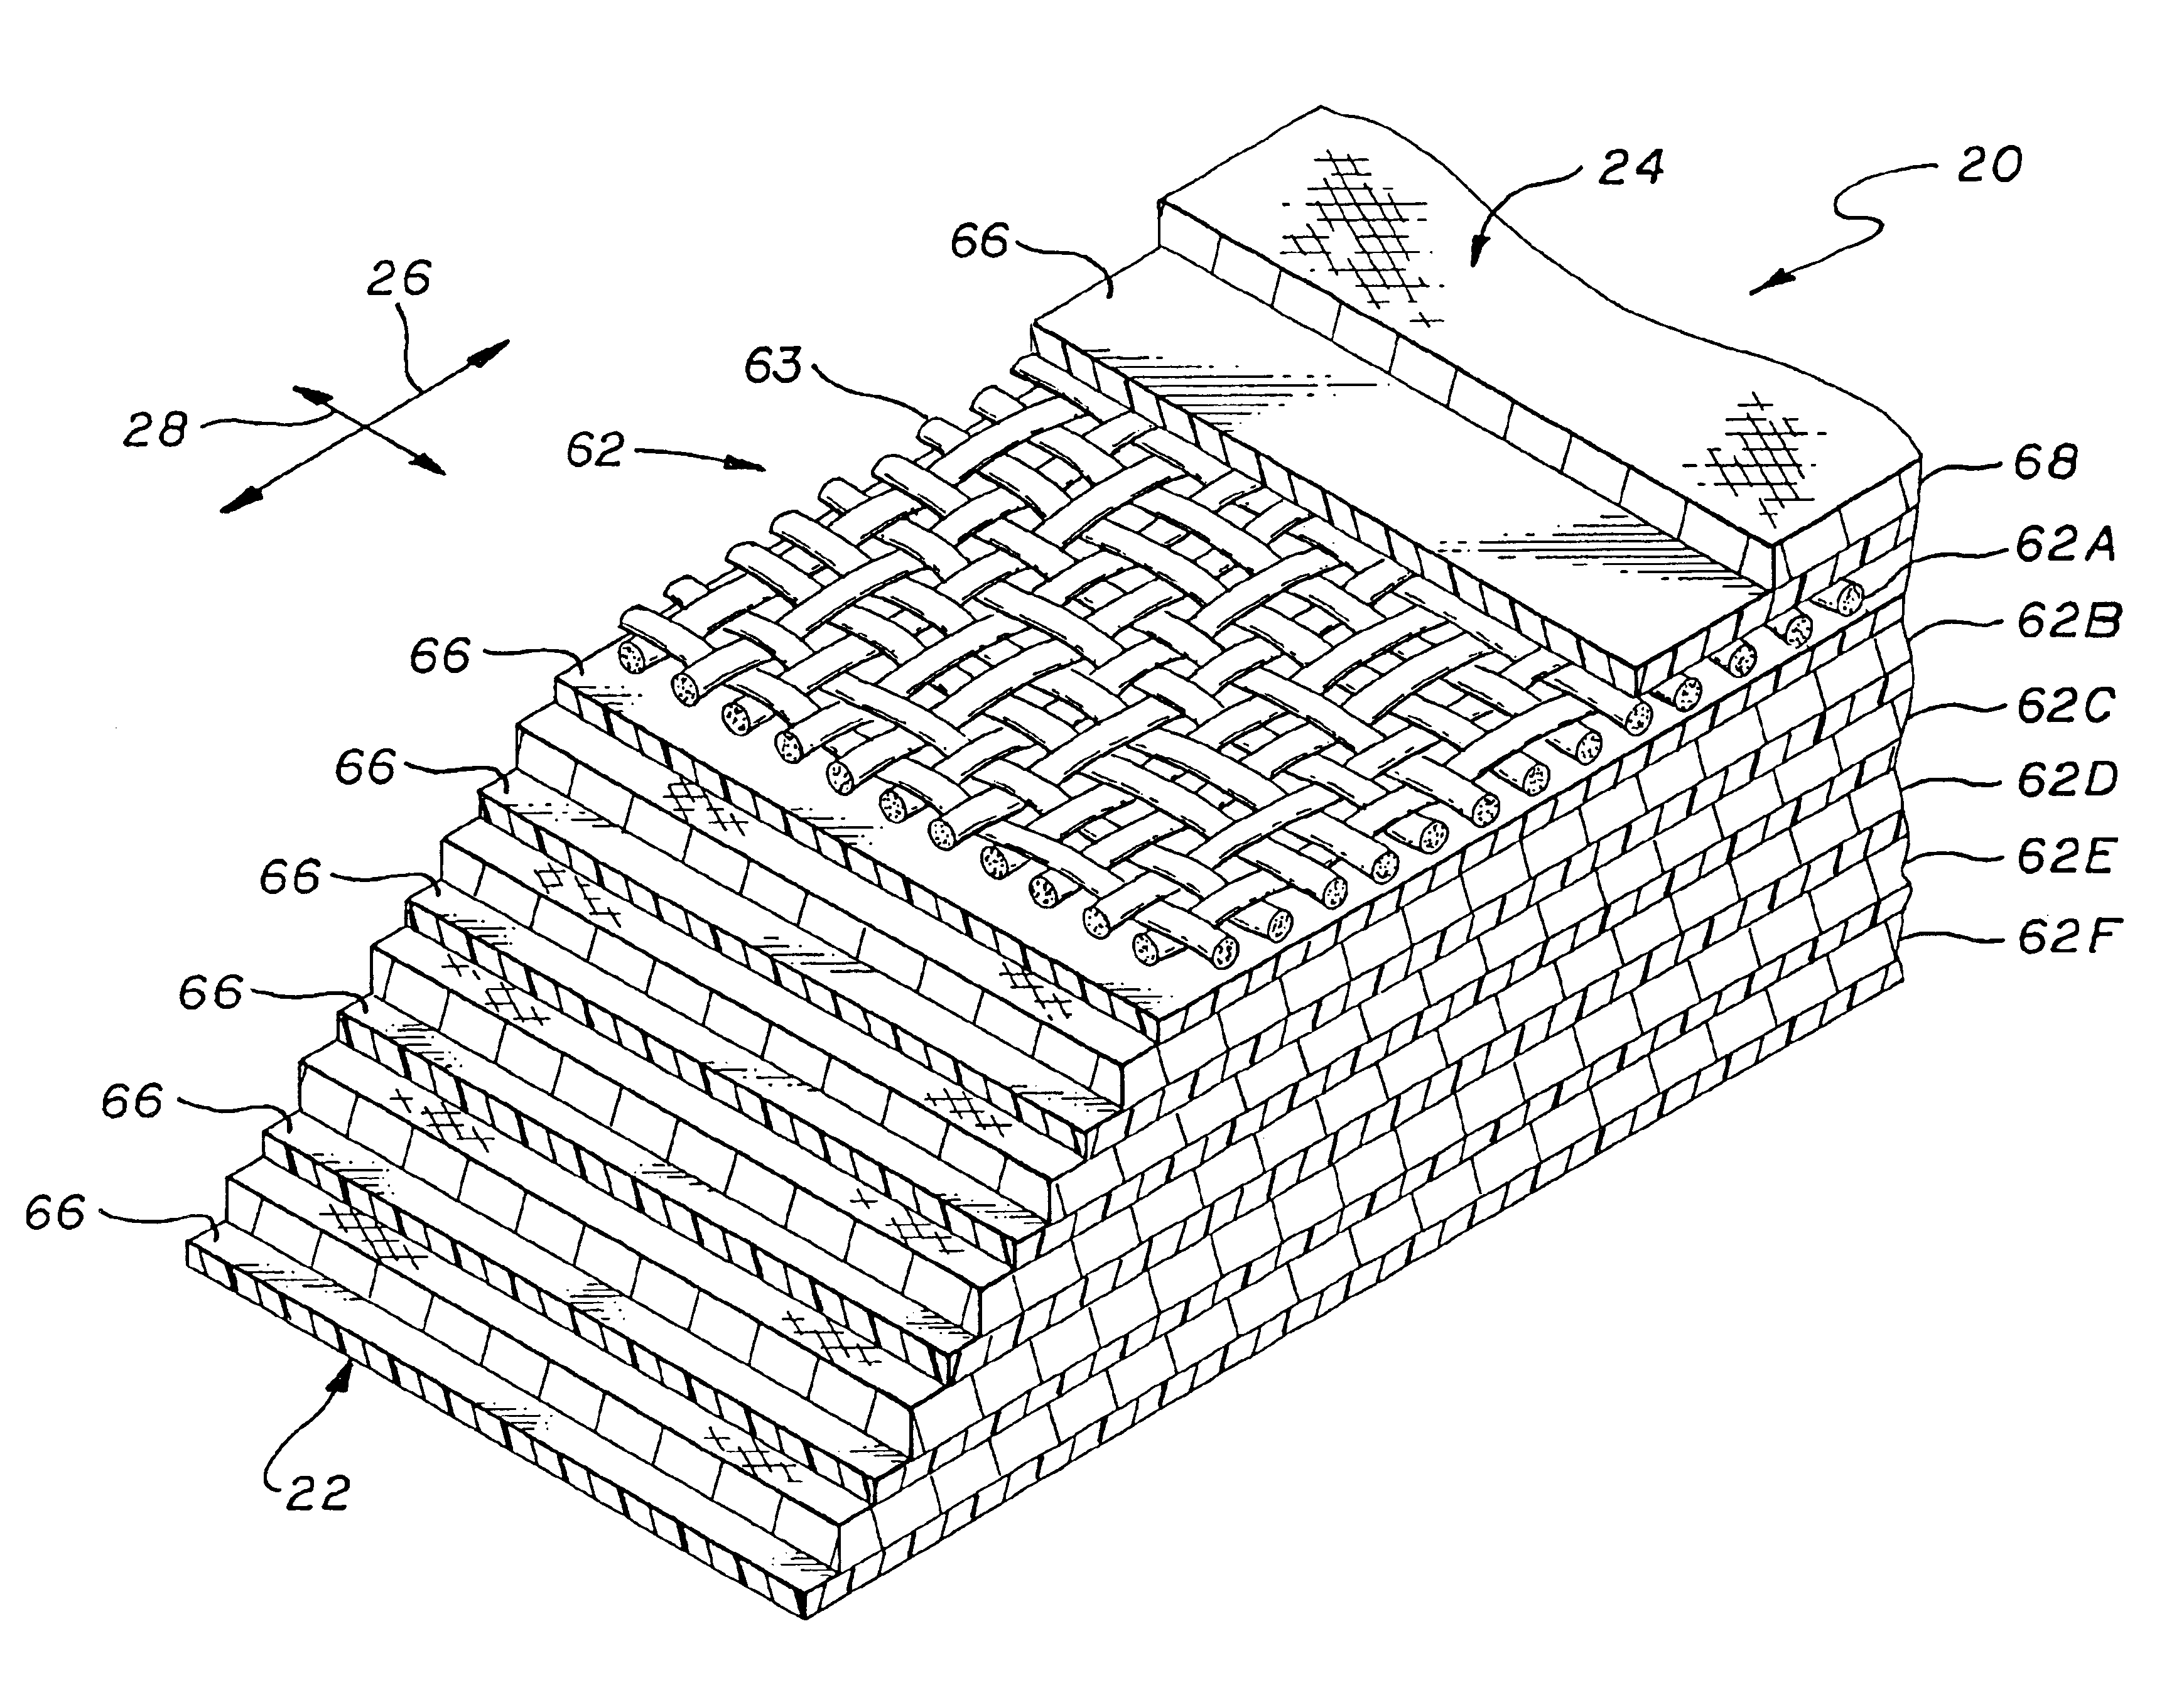 Flexible wall material for use in an inflatable structure